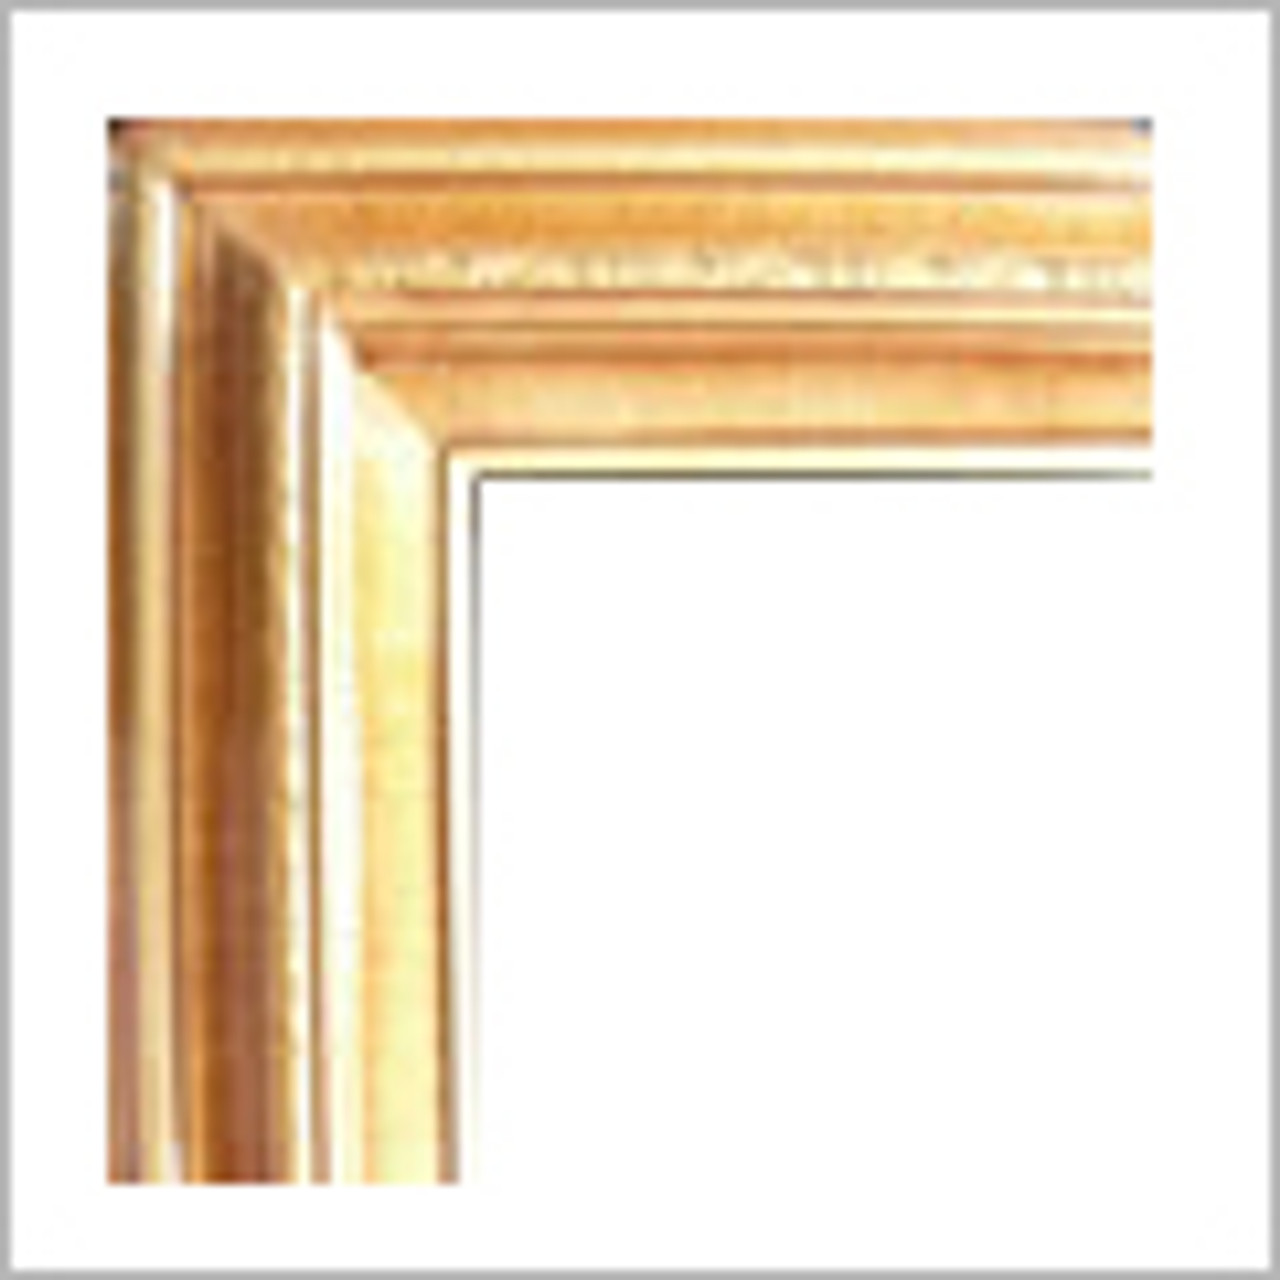  3 Inch Deluxe Wood Frames: 8X8